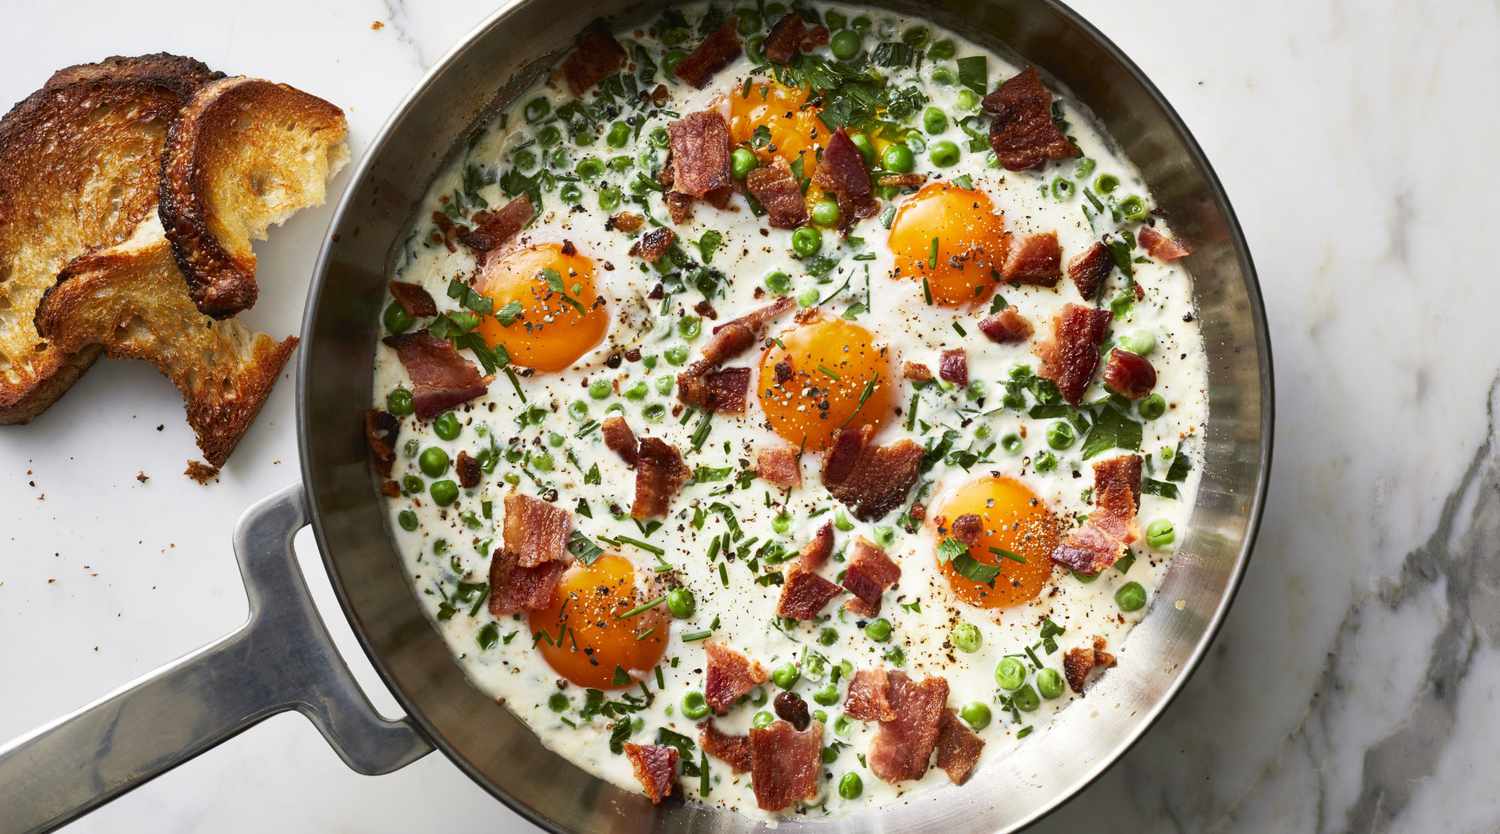 Creamy Peas With Eggs and Bacon Recipe